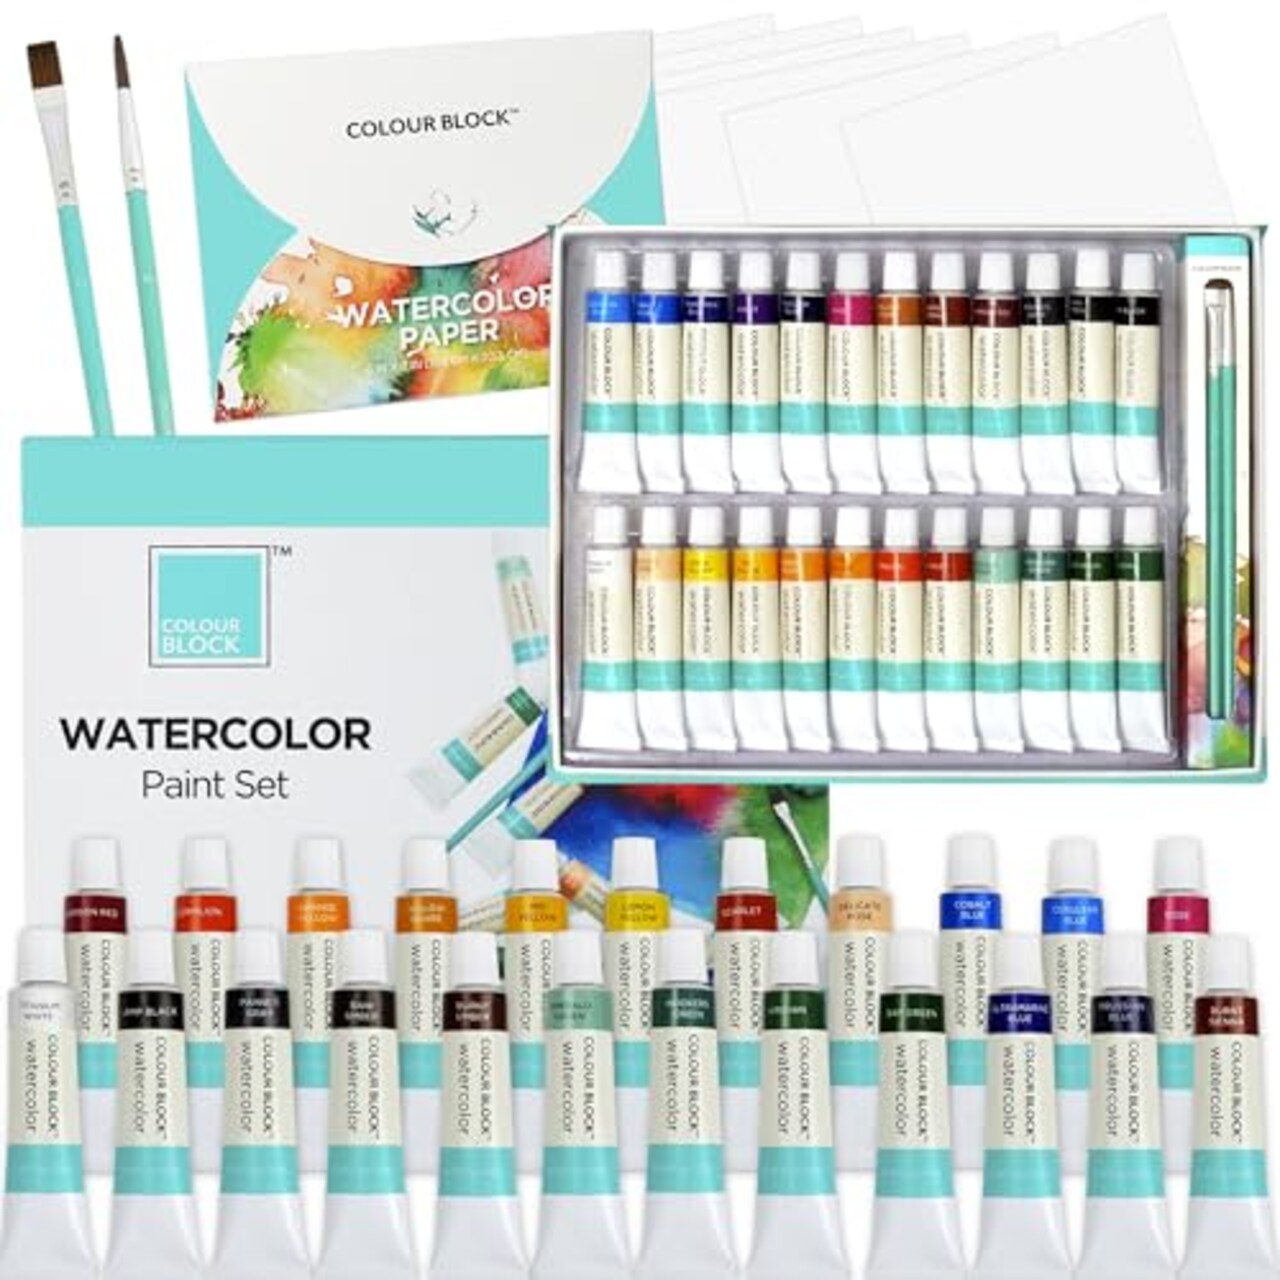 COLOUR BLOCK 32 Ultimate Watercolor Paint Set for Adults and Artists,  Contains 24 Vibrant Colors, 2 Brushes, 6 Sheets Watercolor Paper, Perfect  for School Supplies